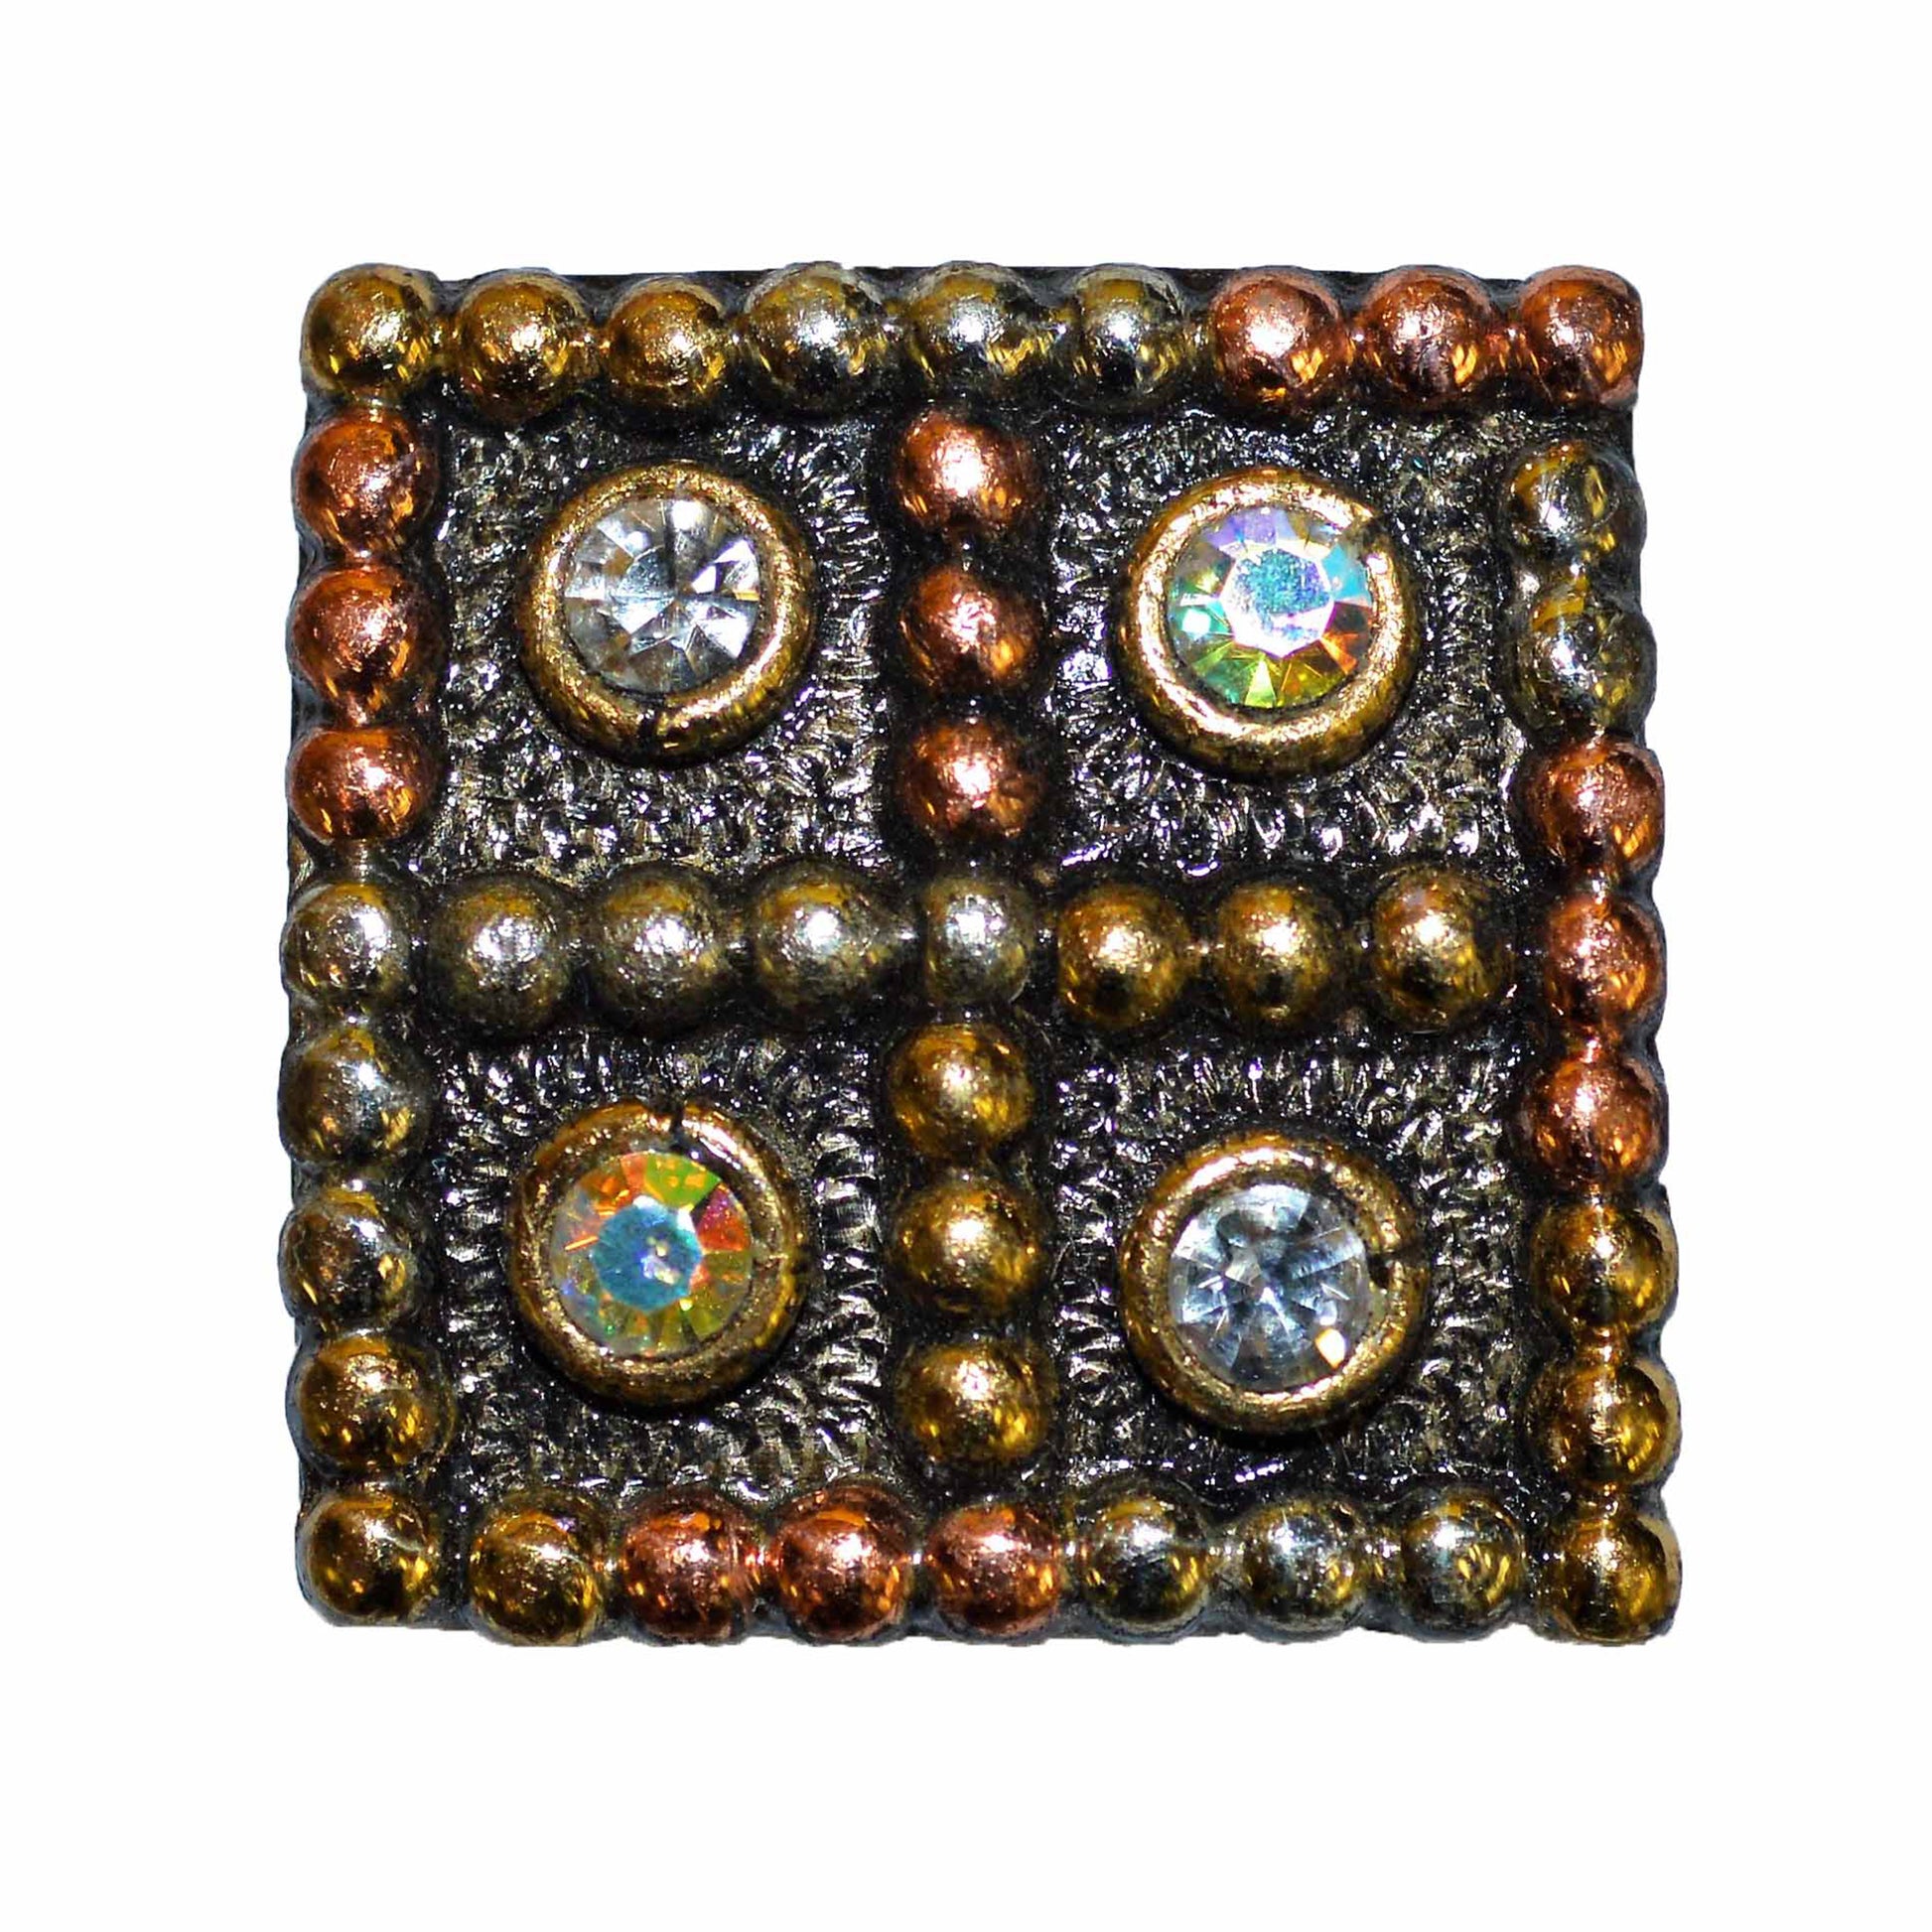 1" 4C Square concho with tri spots around center and edge and prism crystals (set of 4). 